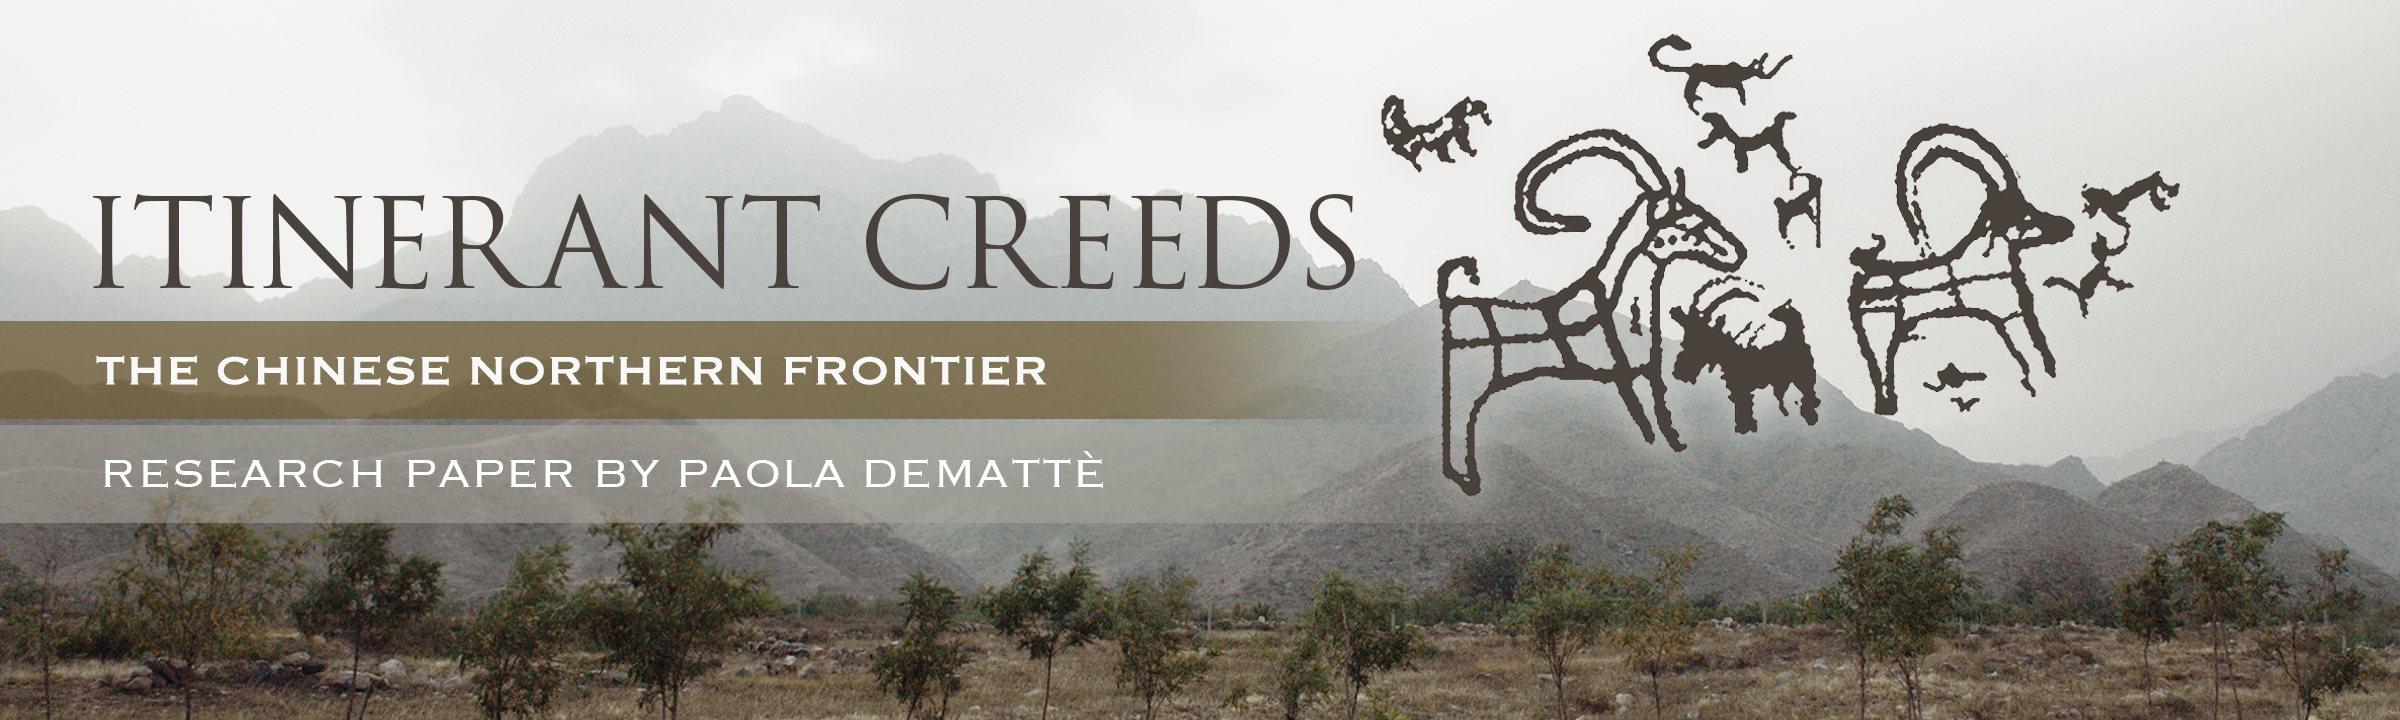 Itinerant Creeds: The Chinese Northern Frontier by Paola Demattè